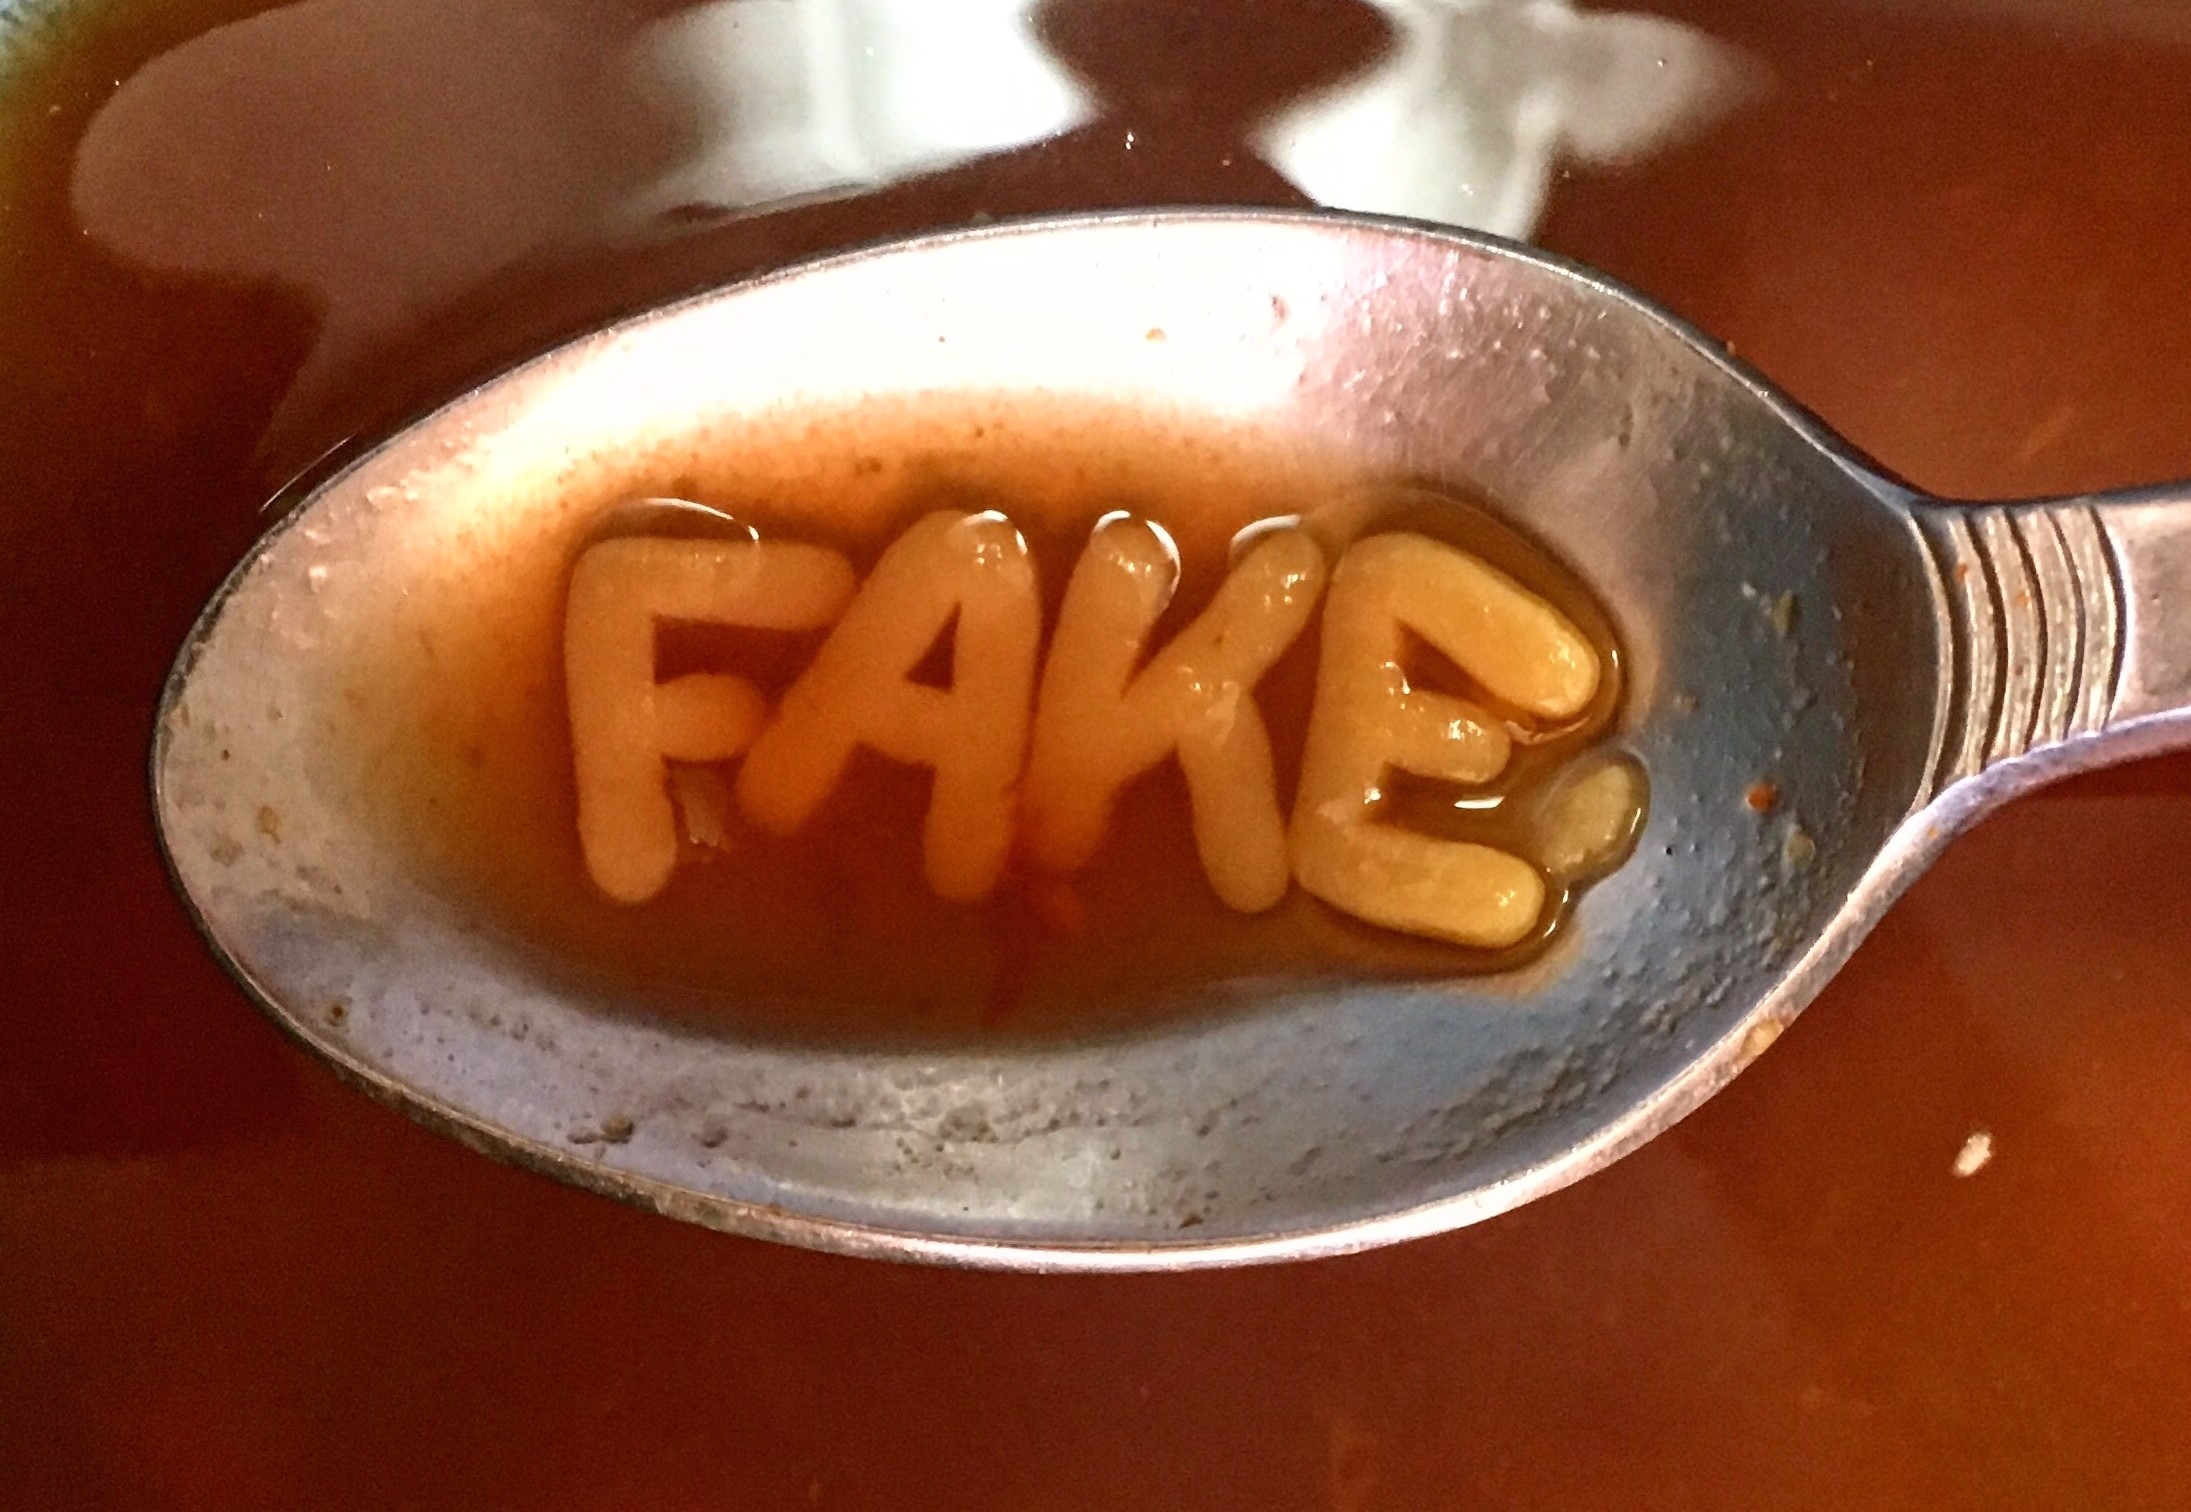 A spoonful of tomato alphabet soup, containing the letters F A K E.